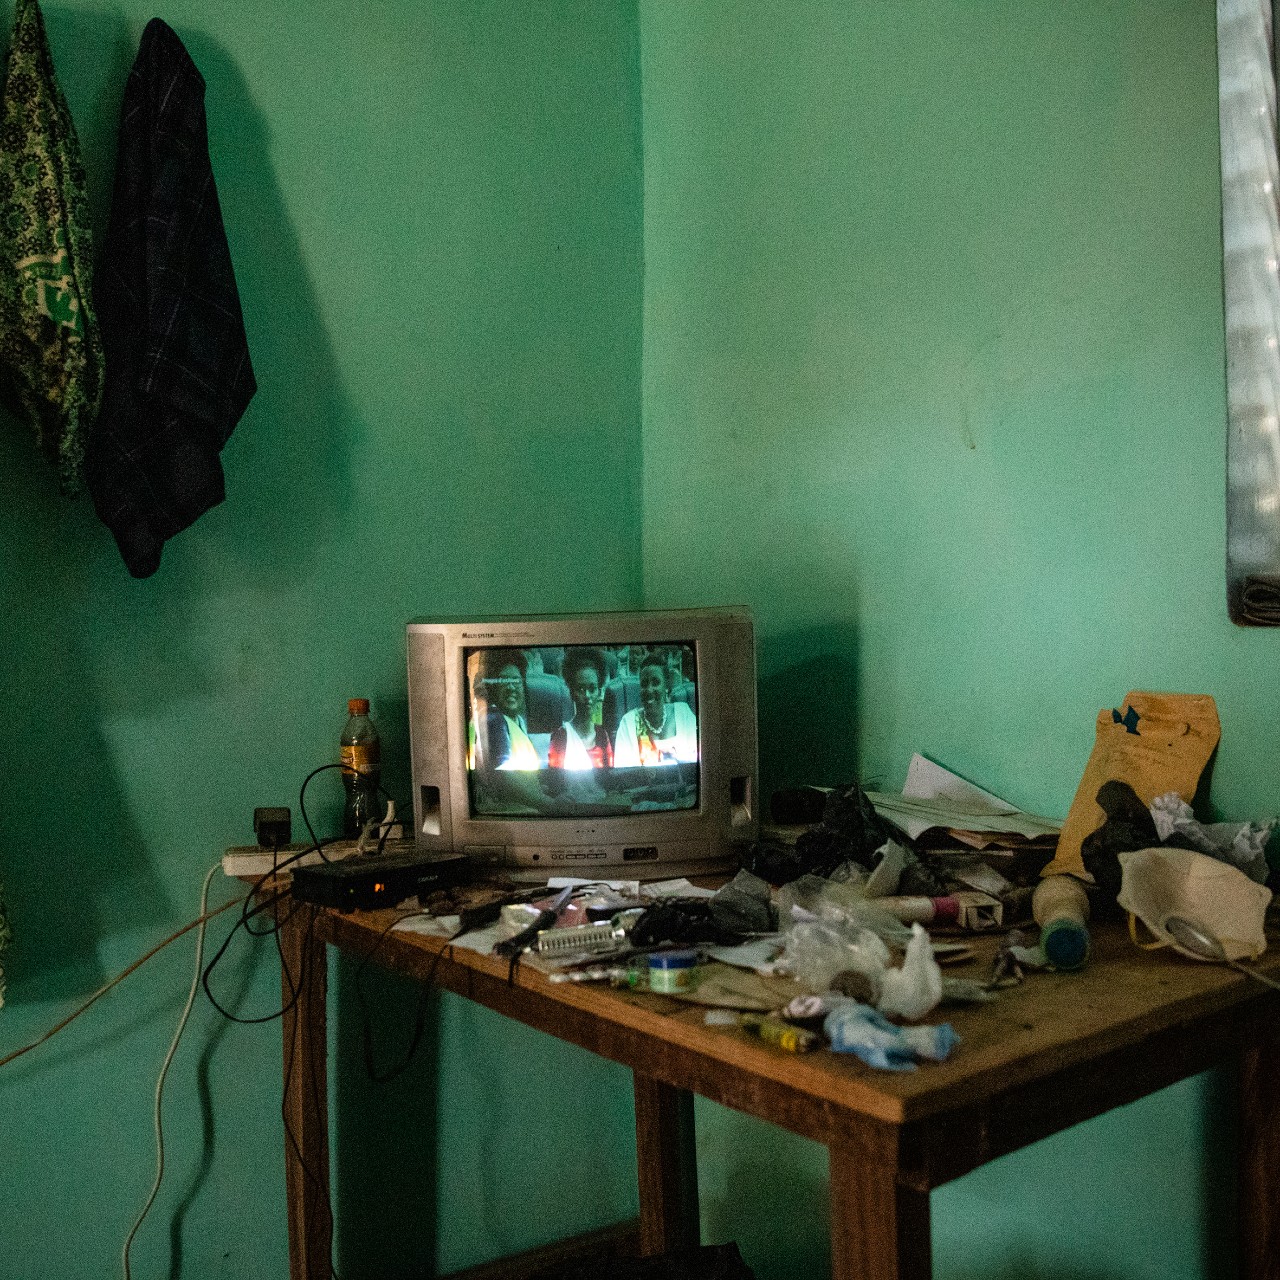 A TV in the corner of a room demonstrating the distribution mechanism used by DMI in this campaign